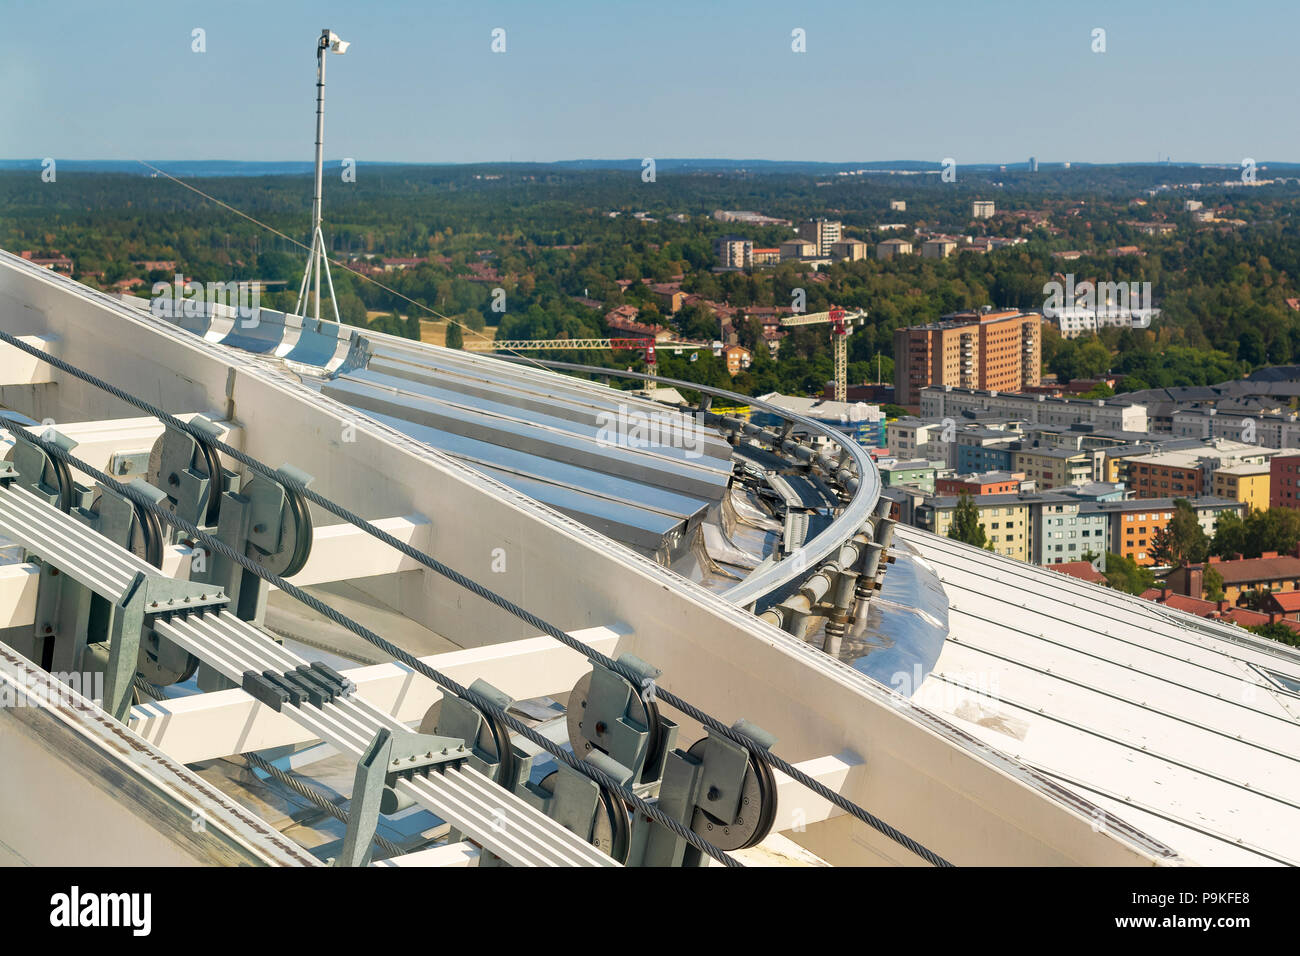 Ride with the Skyview on the top of Globen arena Stock Photo